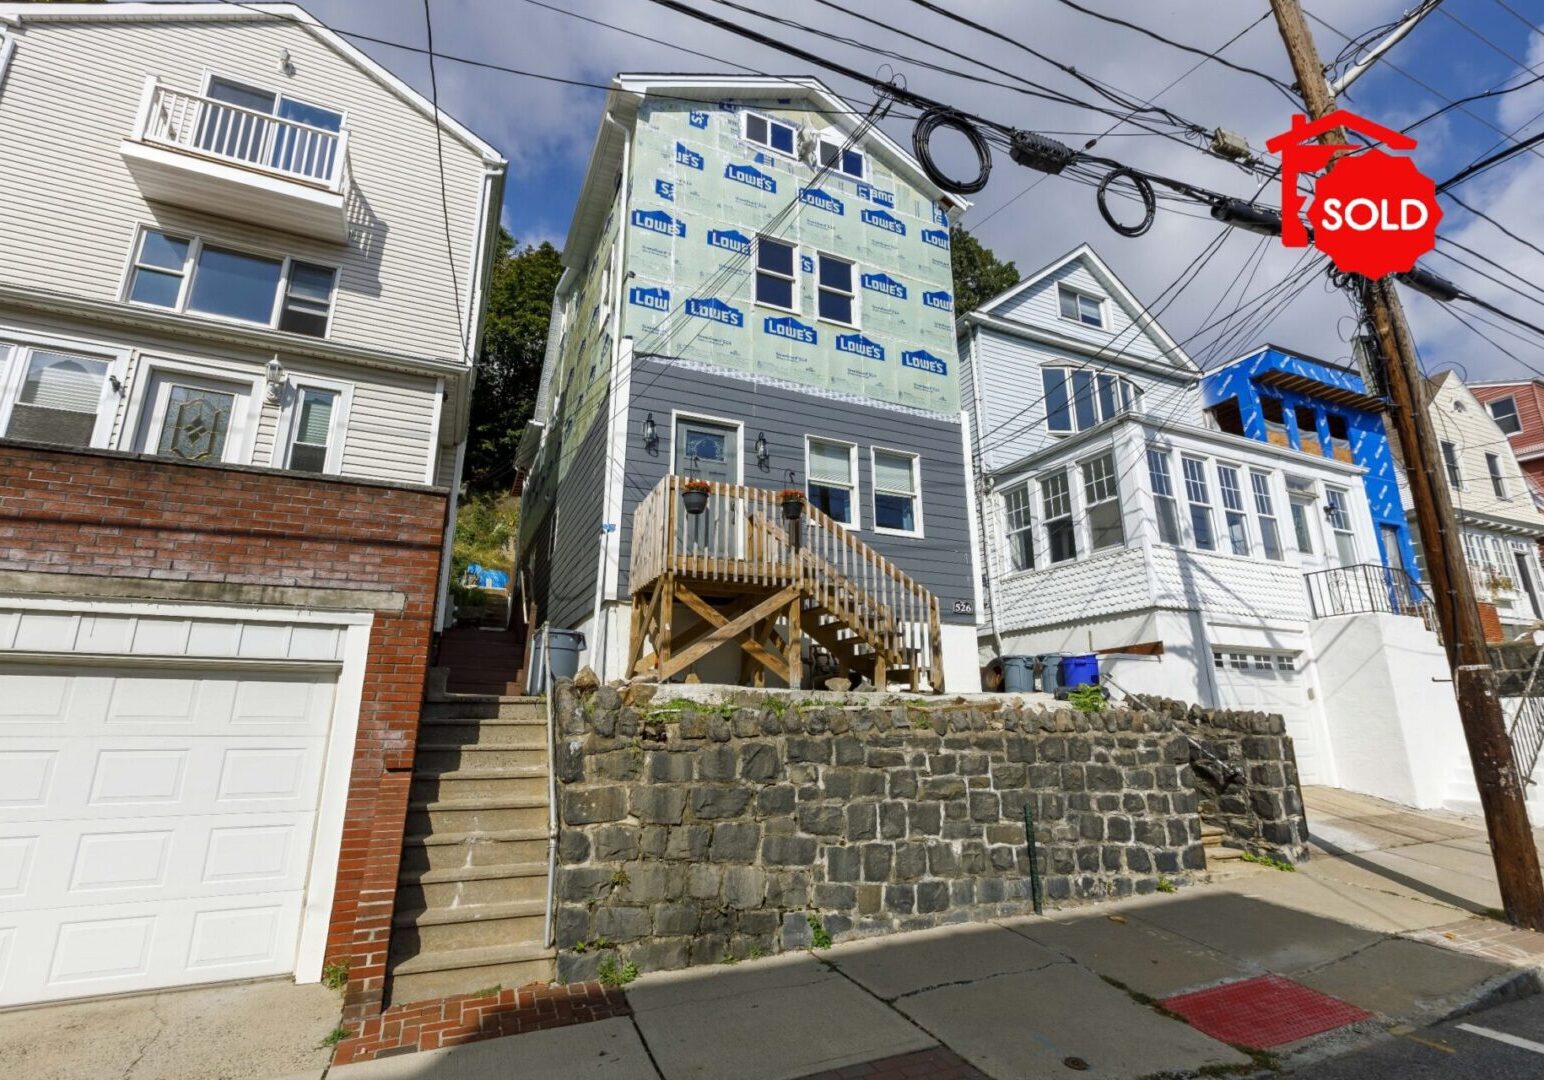 SOLD - 526 Undercliff Avenue Edgewater, NJ 07020
<br><br>
$899,000